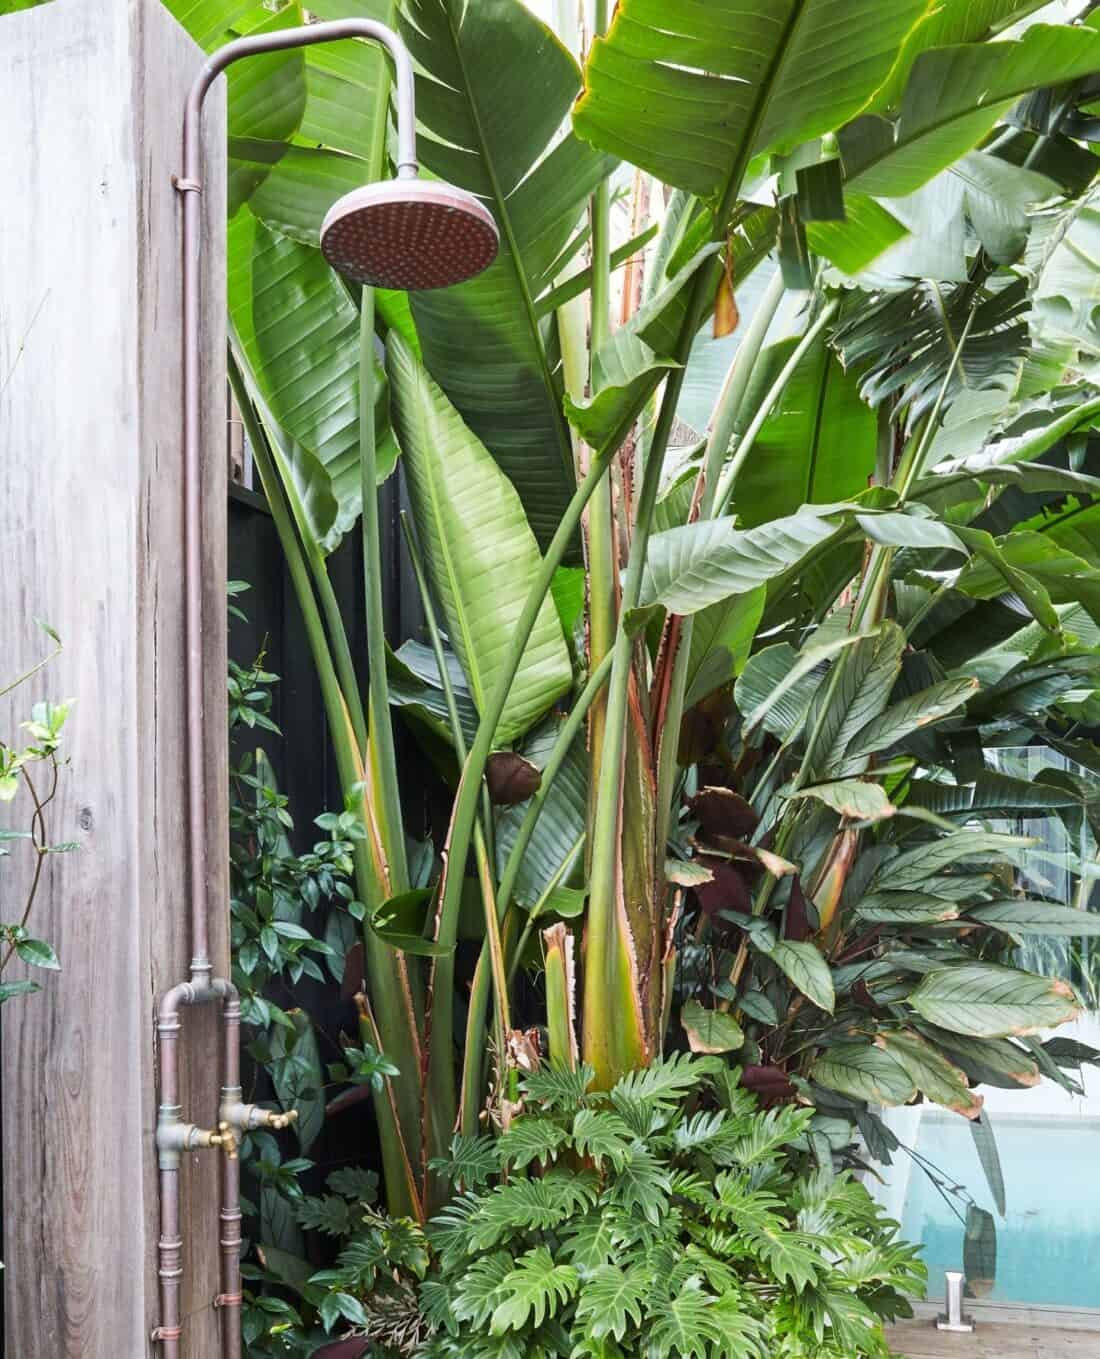 An outdoor shower surrounded by lush, tropical plants for a cool-off, featuring a large rain shower head and wooden privacy walls.